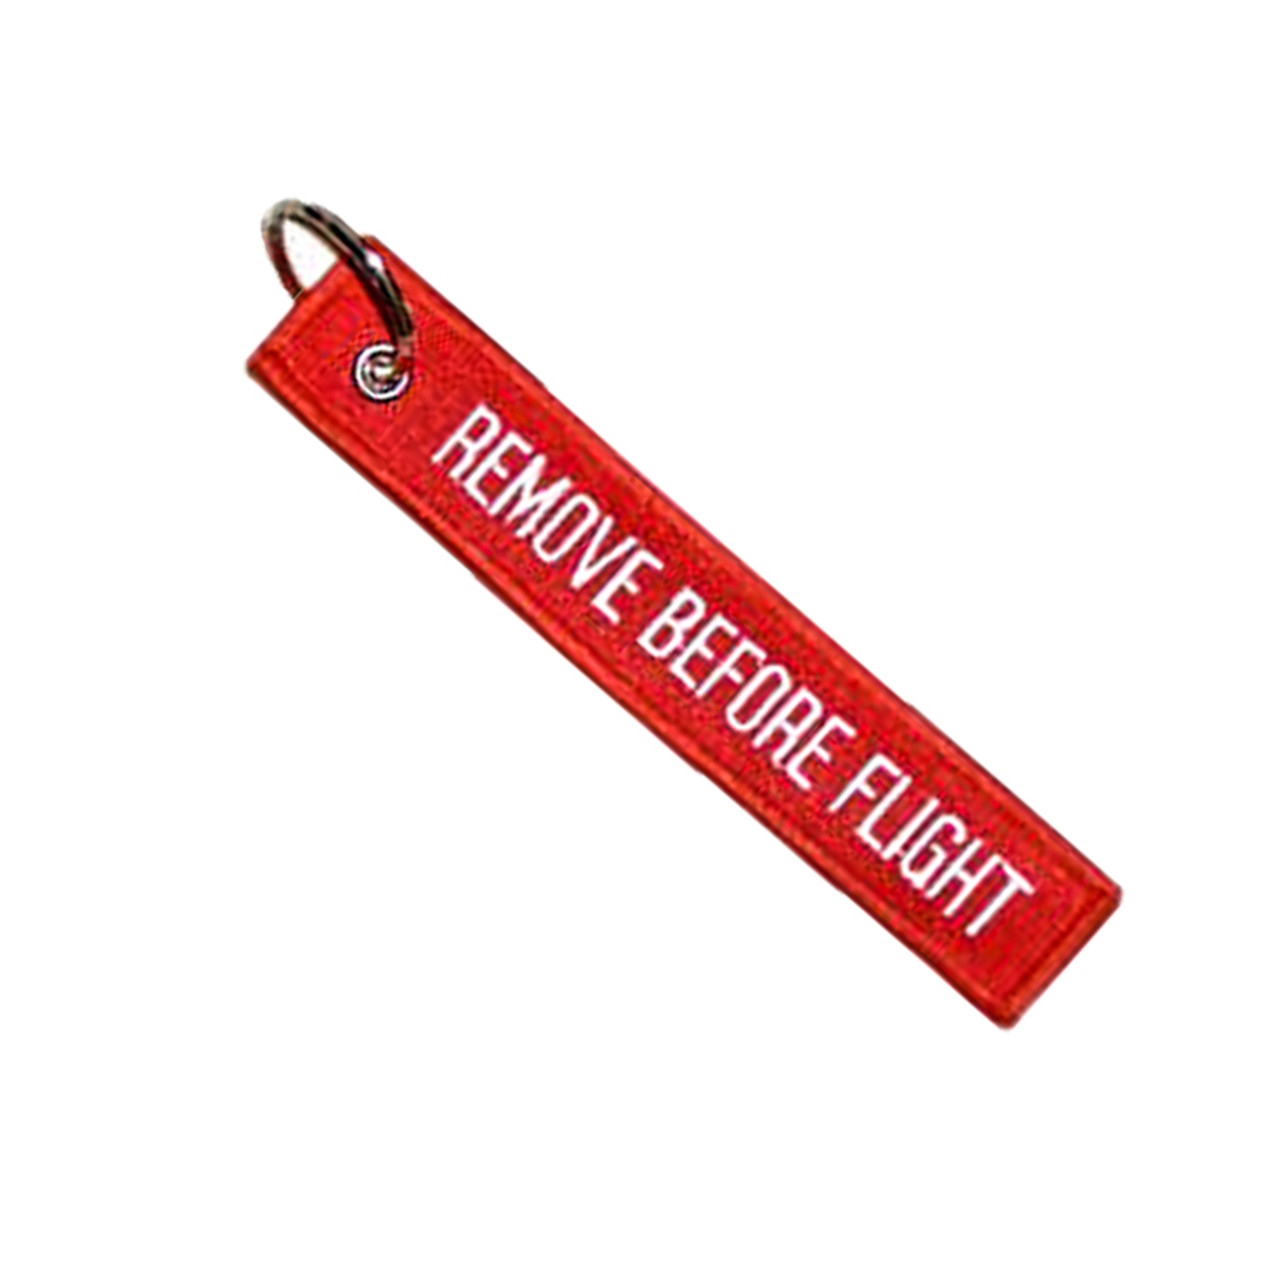 Pilot Keychain 3 bars Embroidered Tag Double Up